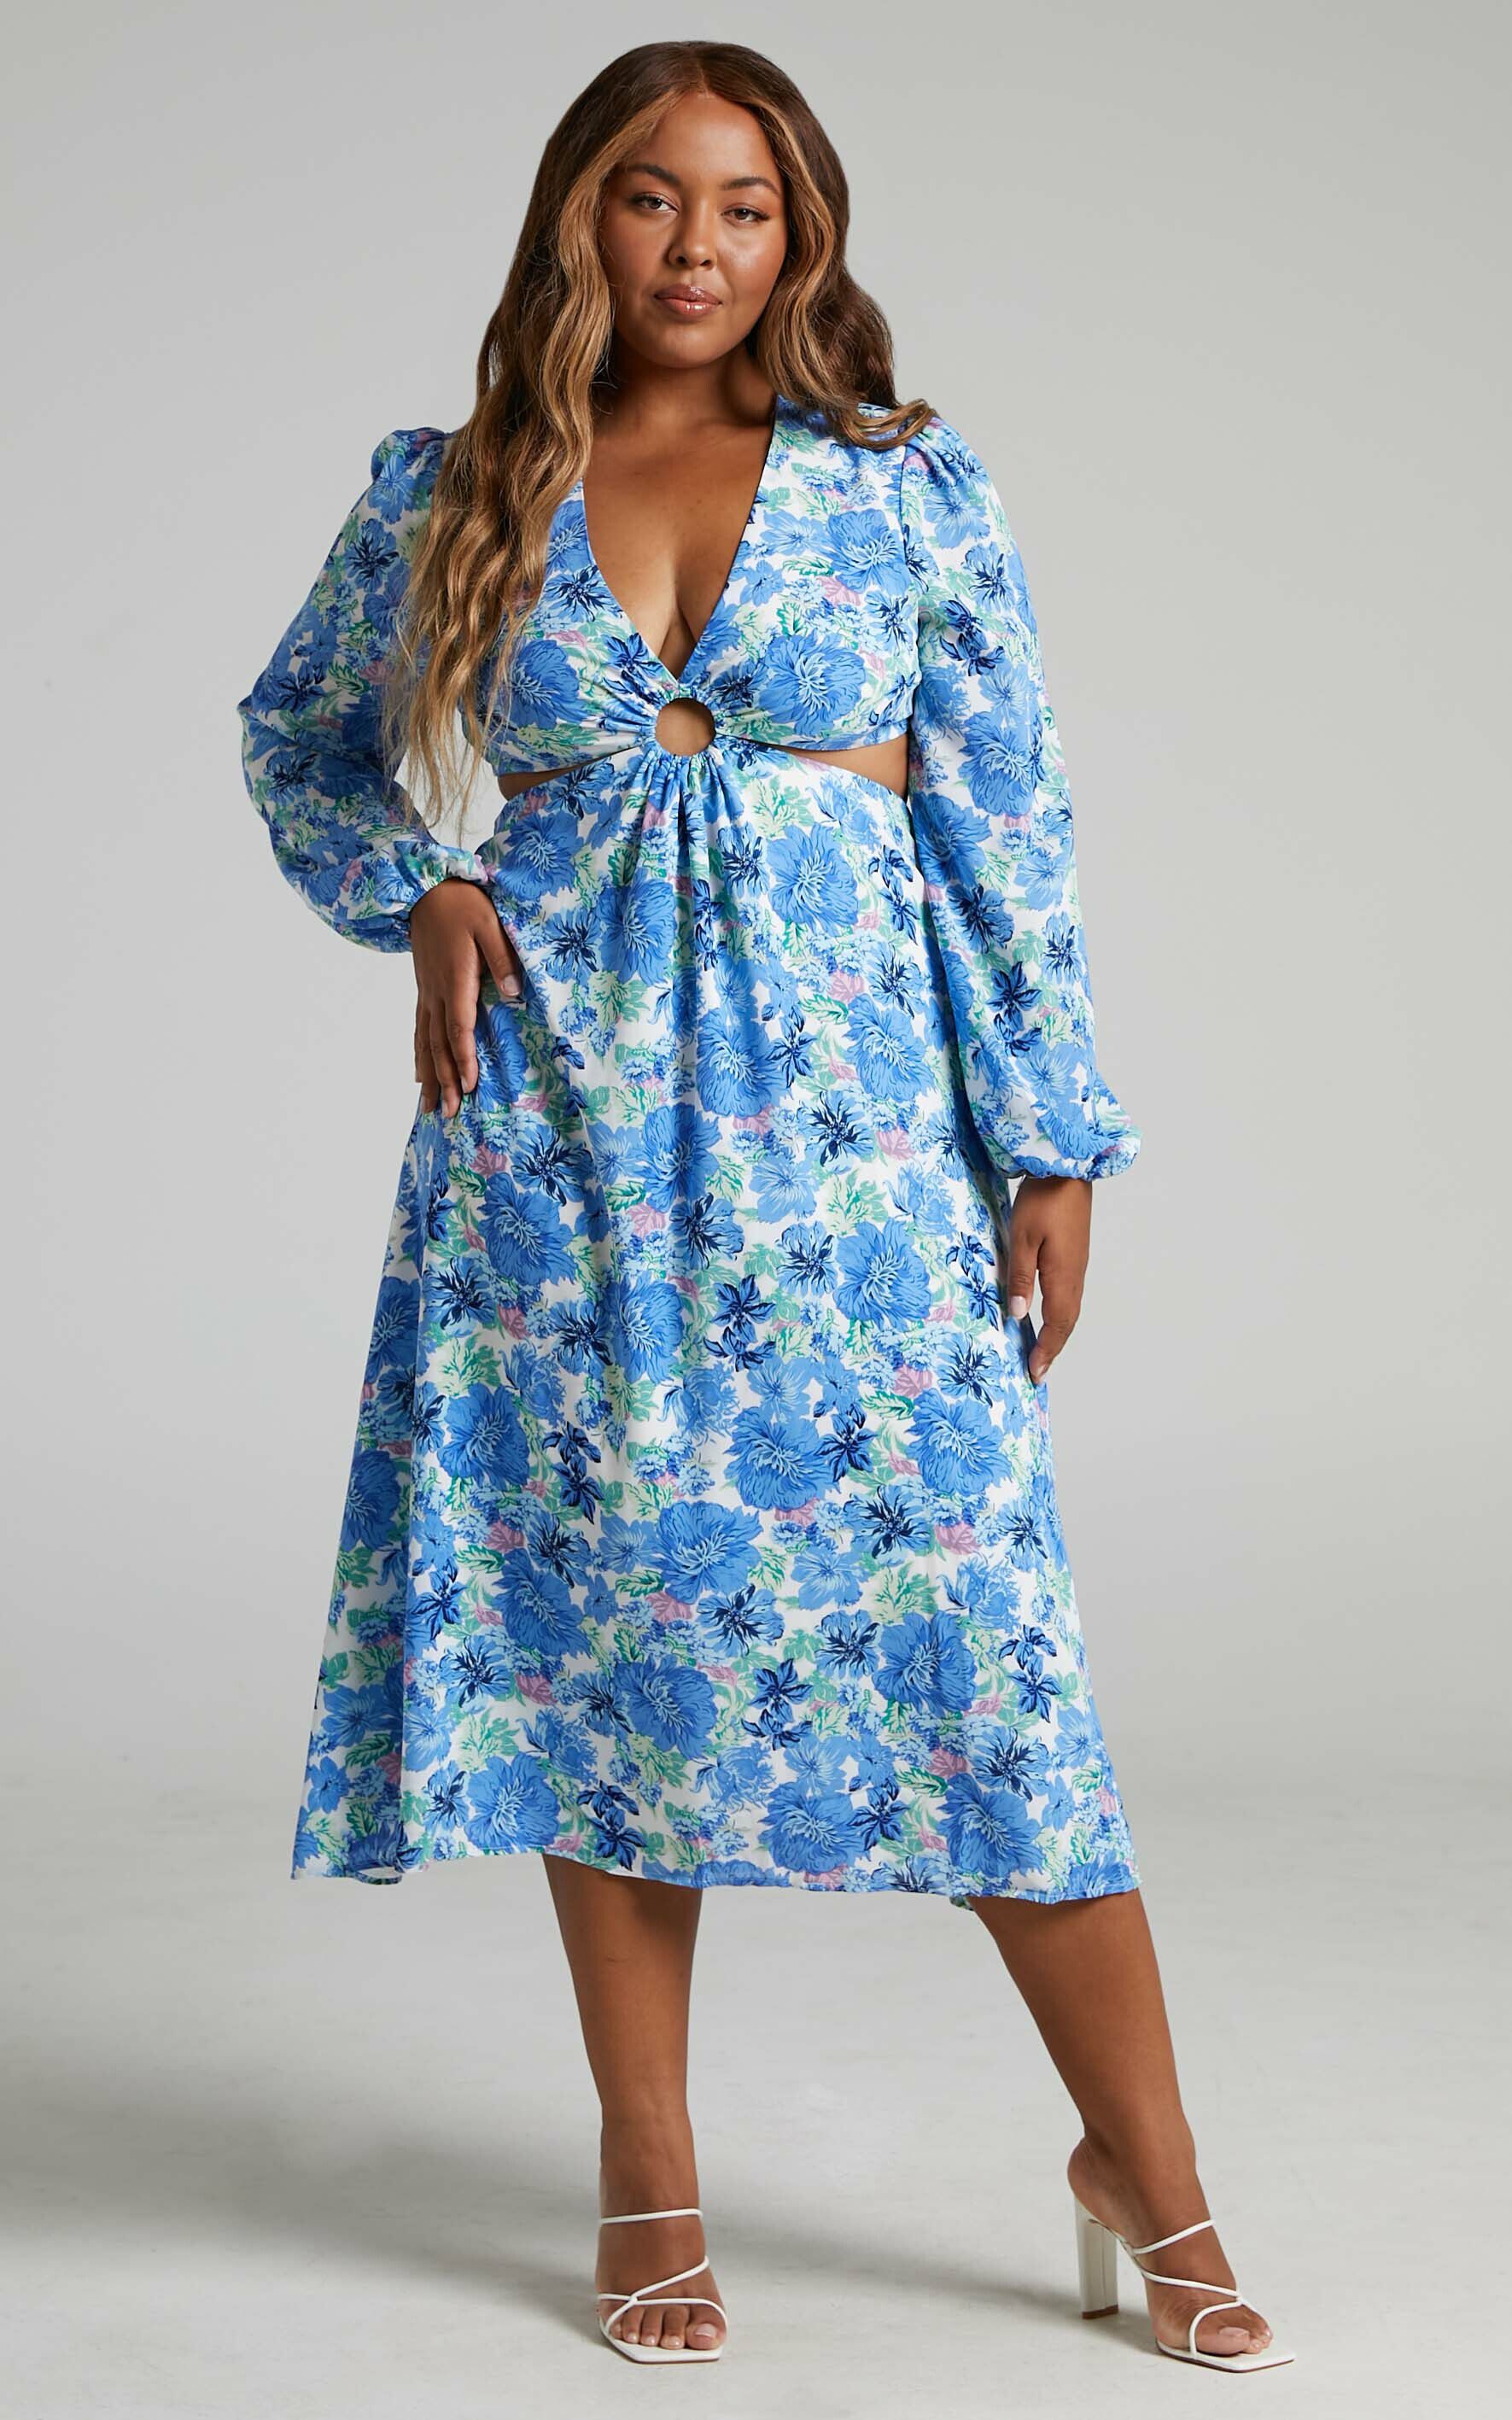 Geneve Ring Cut Out Long Sleeve Midi Dress in Geneve Blue Floral - 04, MLT1, super-hi-res image number null